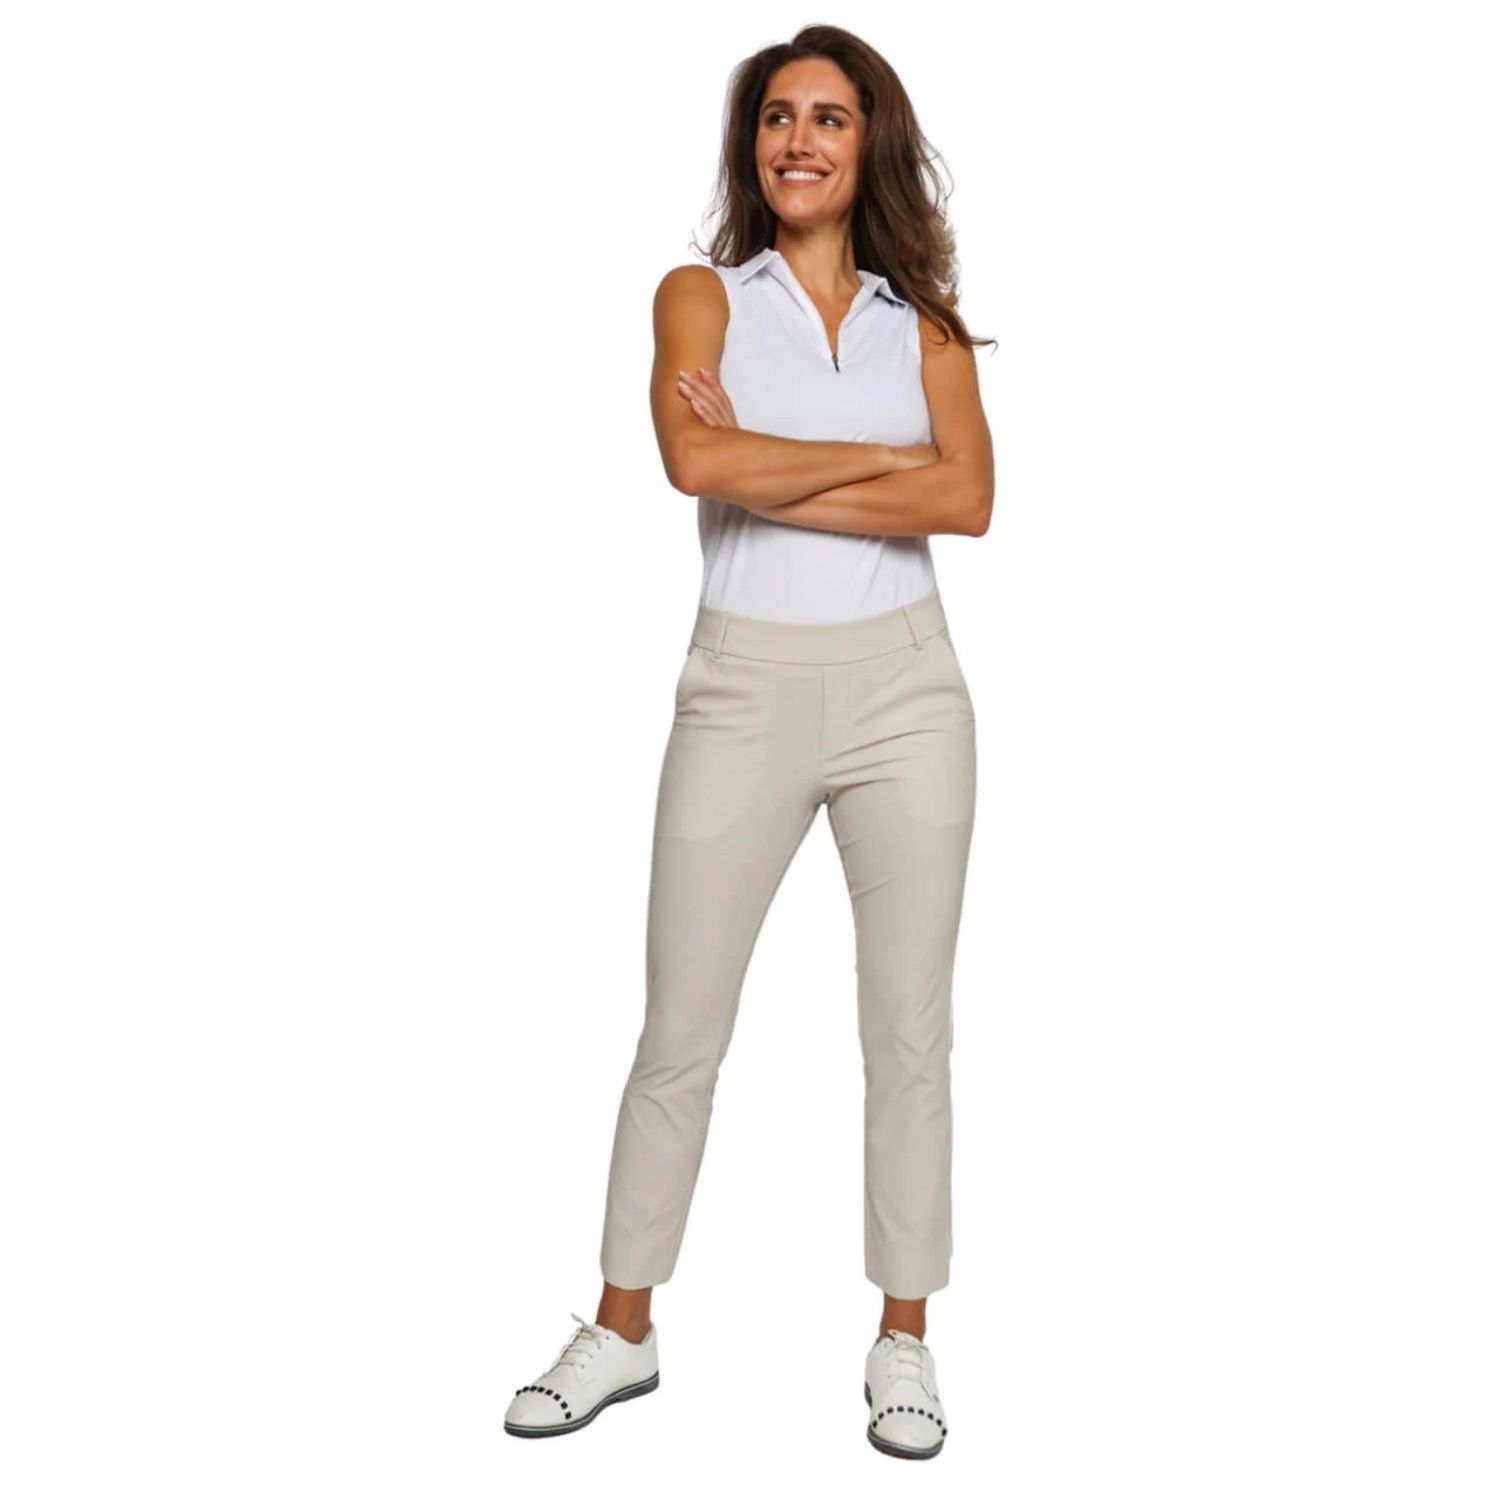 Dick's Sporting Goods Golftini Women's Ankle Pant